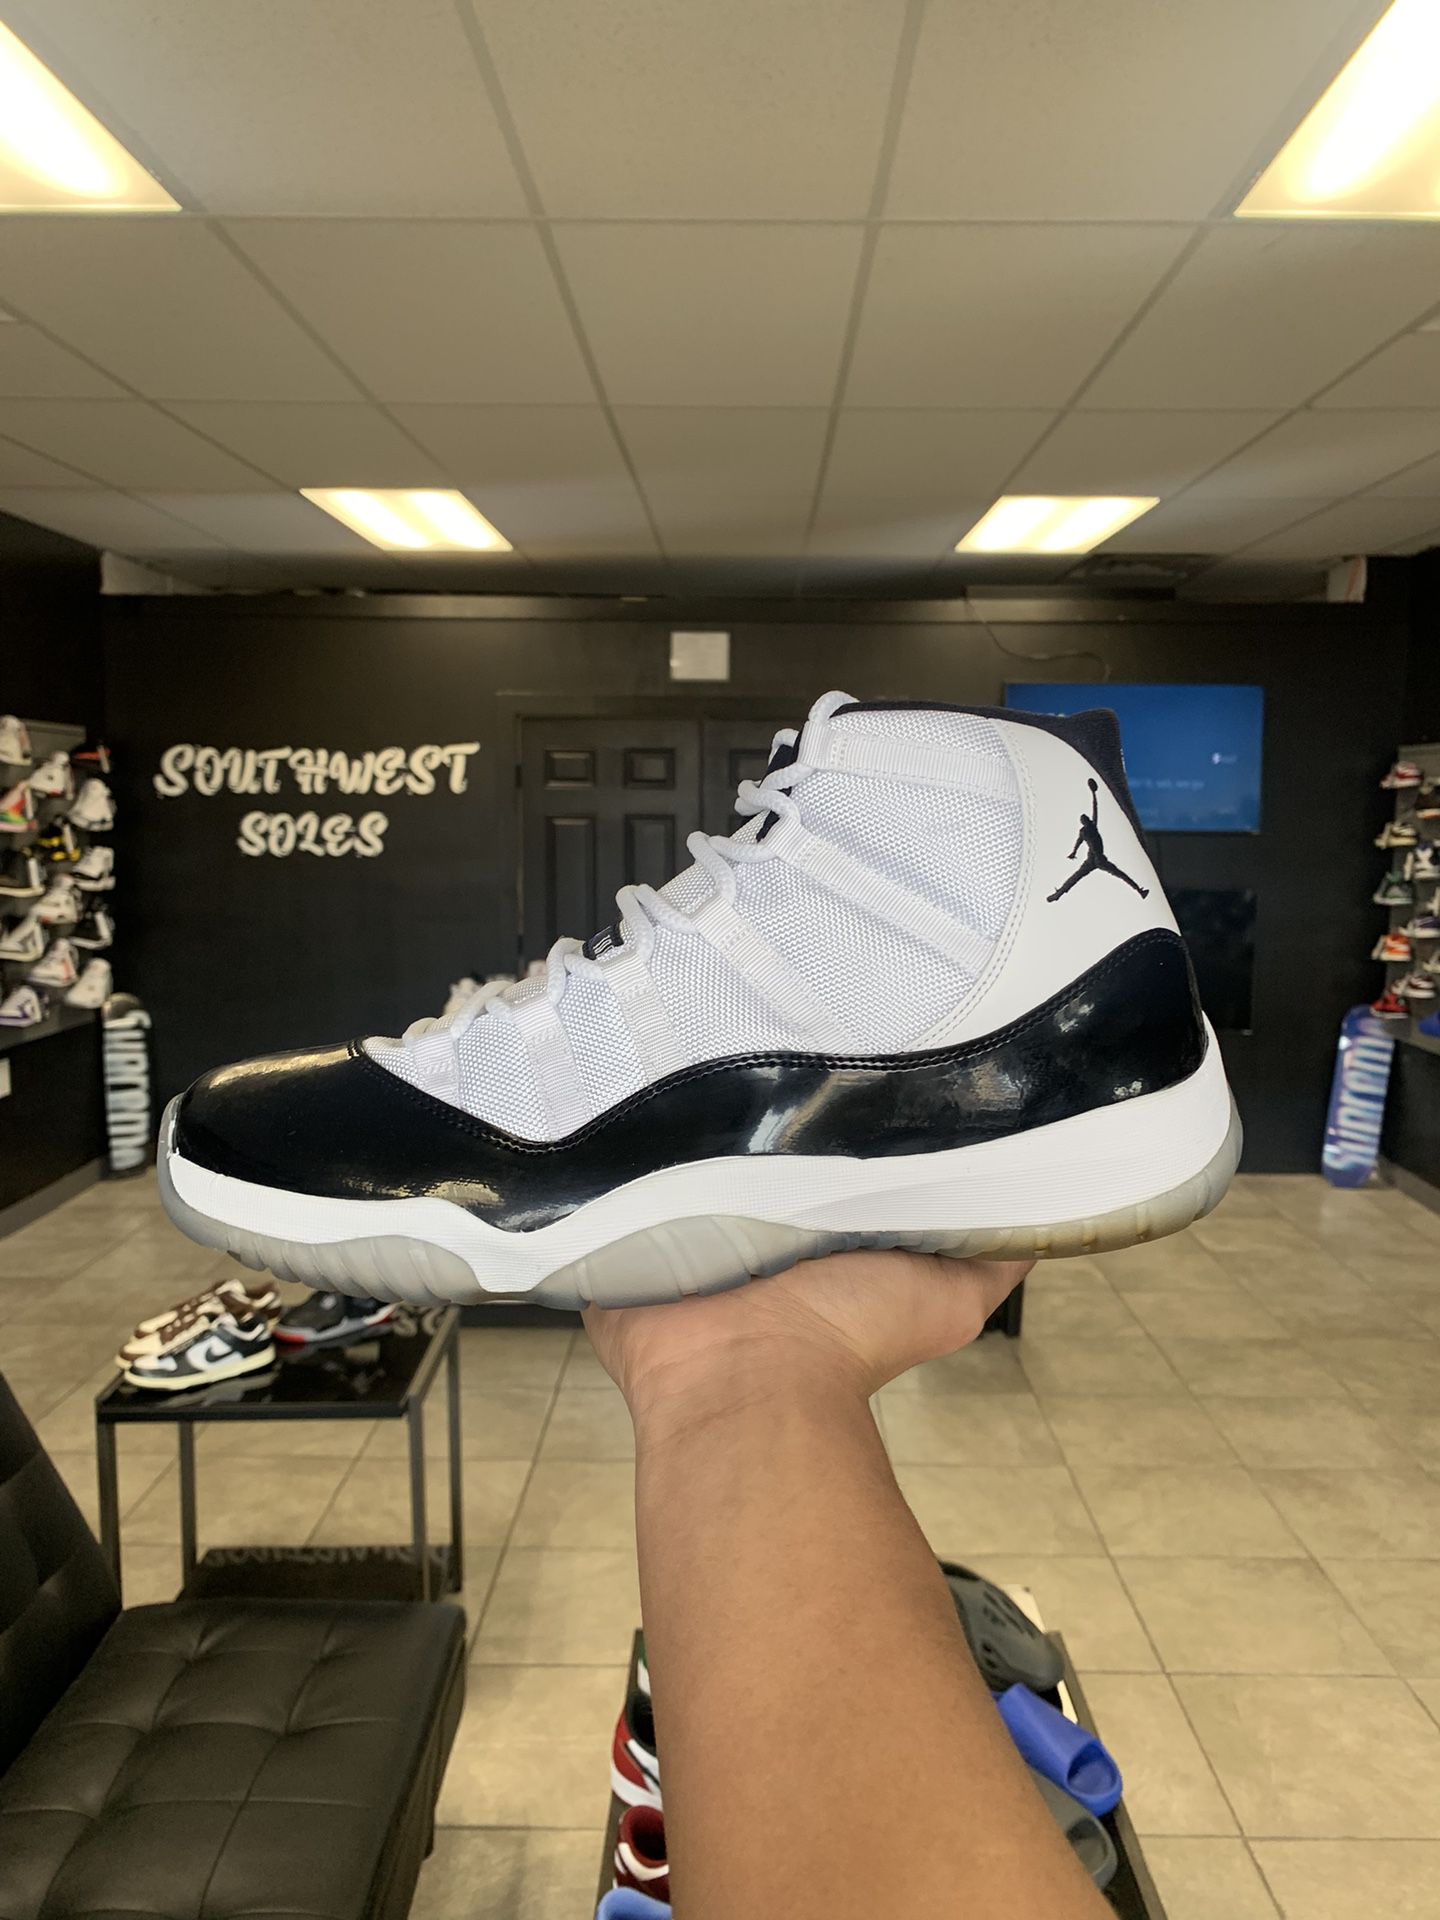 Jordan 11 Concord (2011) Size 13 Available In Store